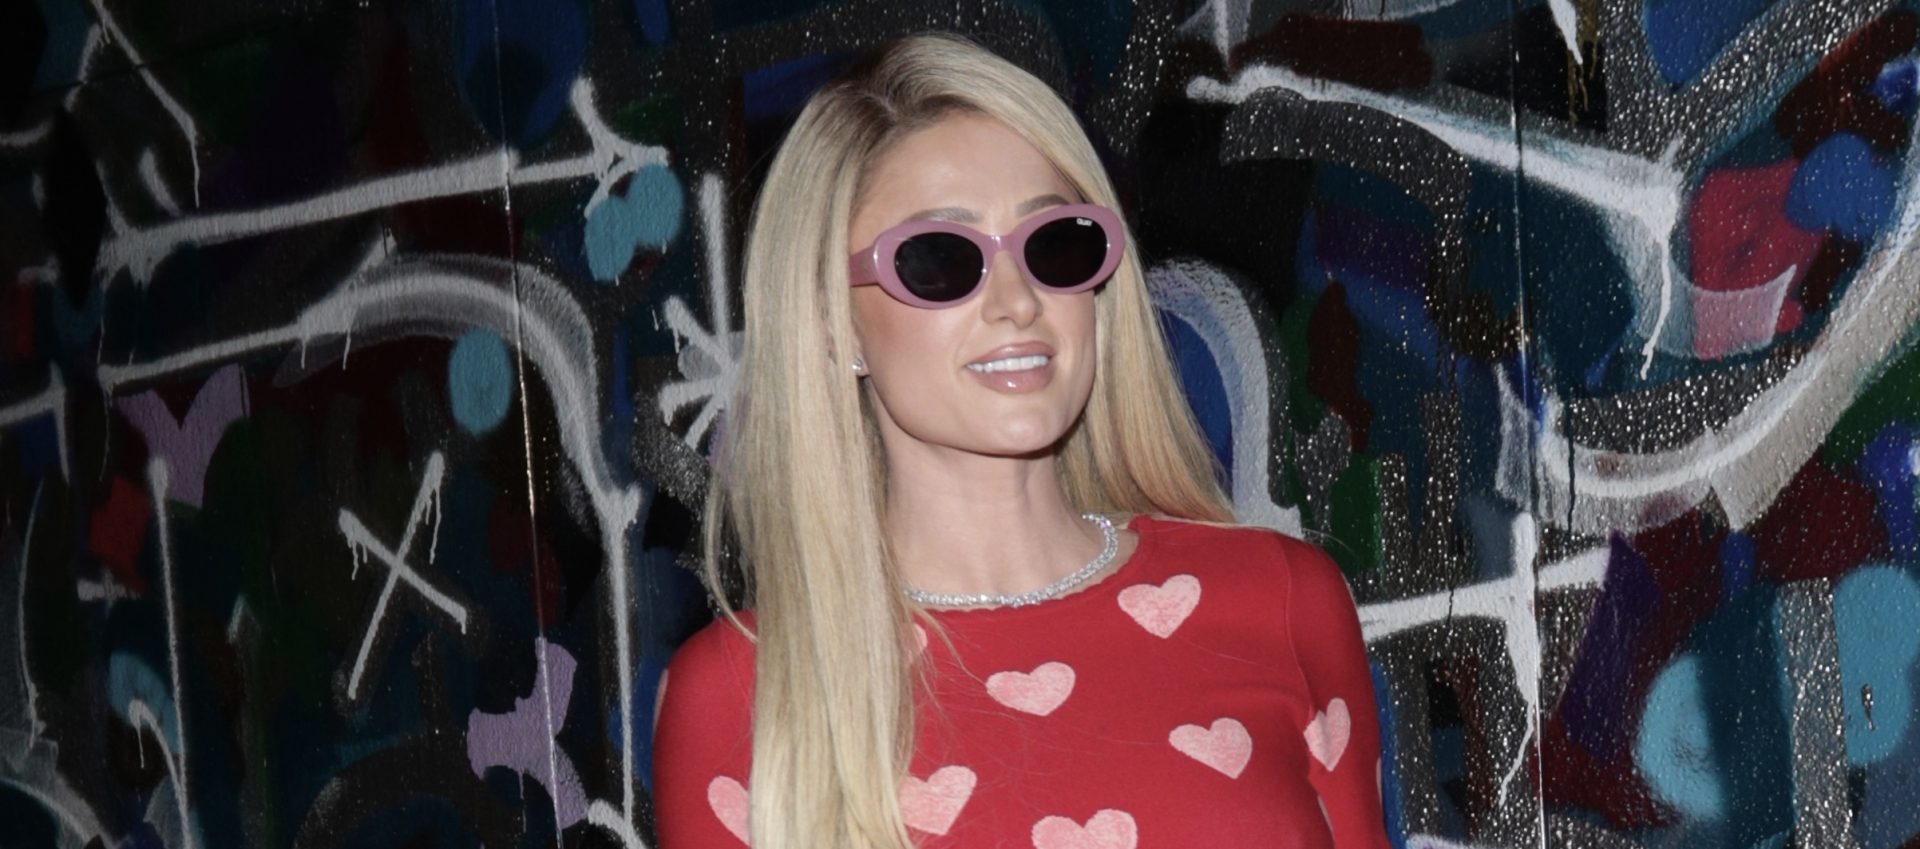 Paris Hilton’s Family Was Unaware Of Her Son For ‘Over A Week’